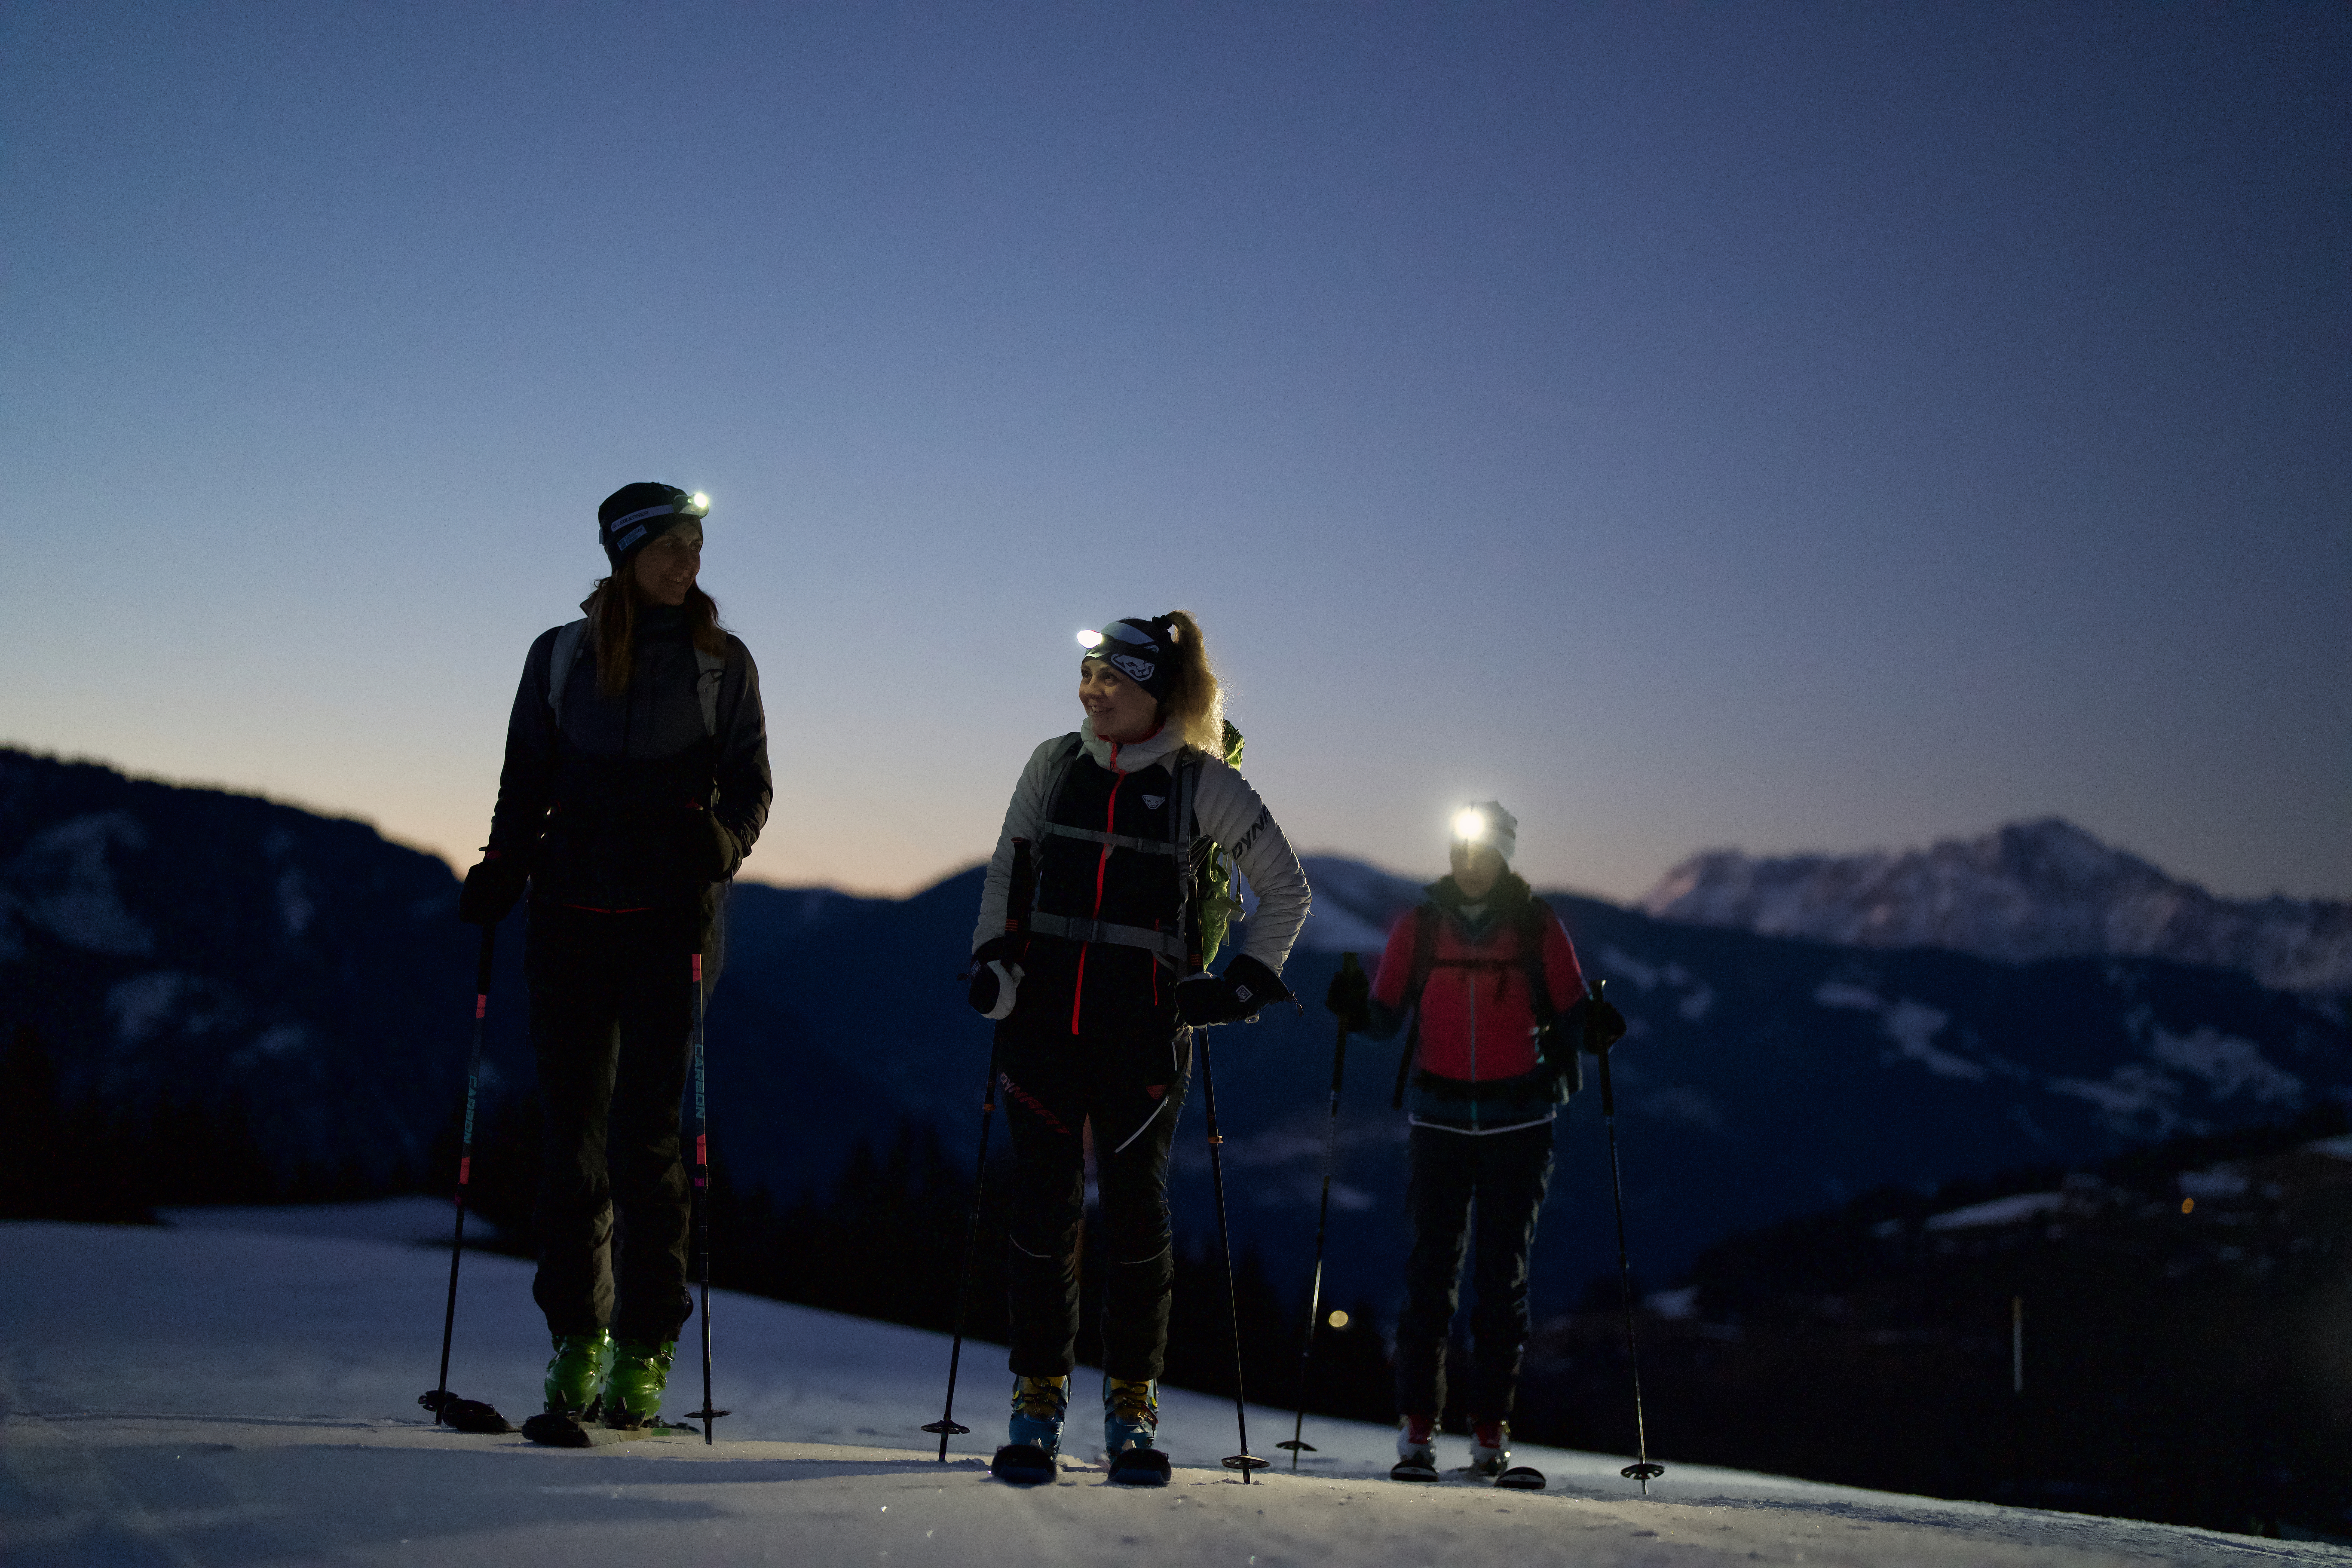 And only the moon is watching | © Zell am See-Kaprun Tourismus